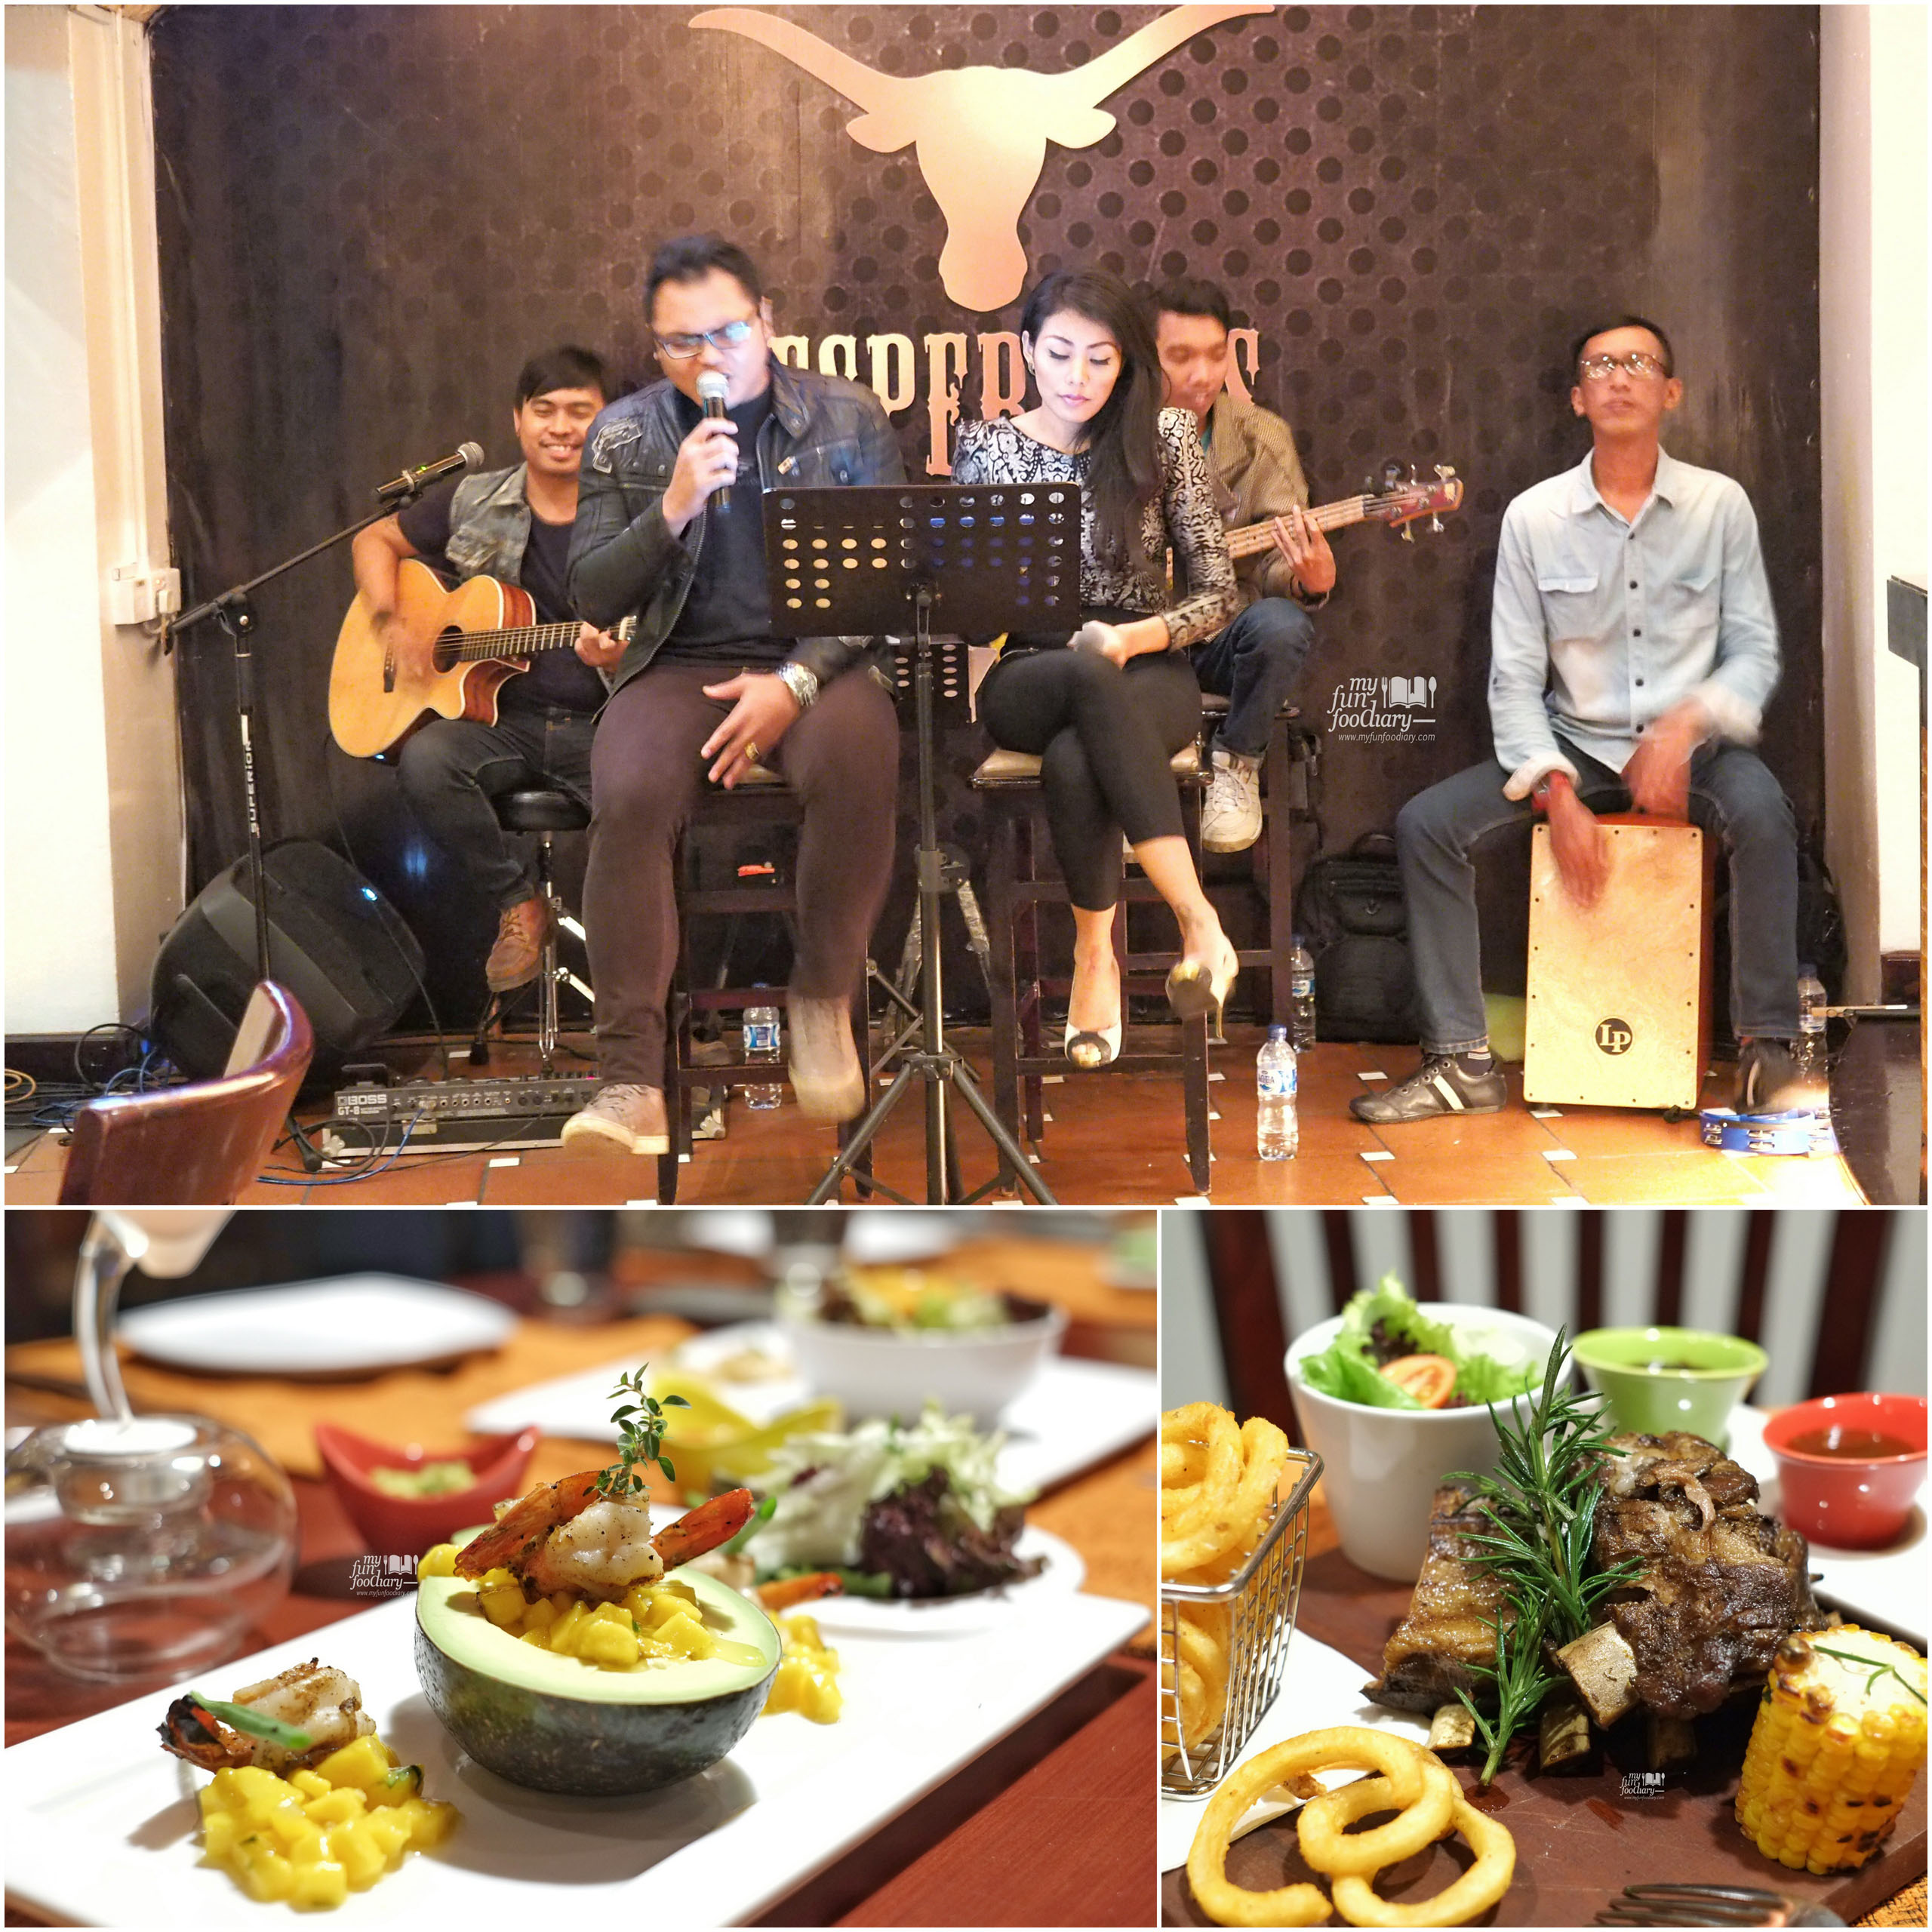 Band Performance at Desperados by Myfunfoodiary